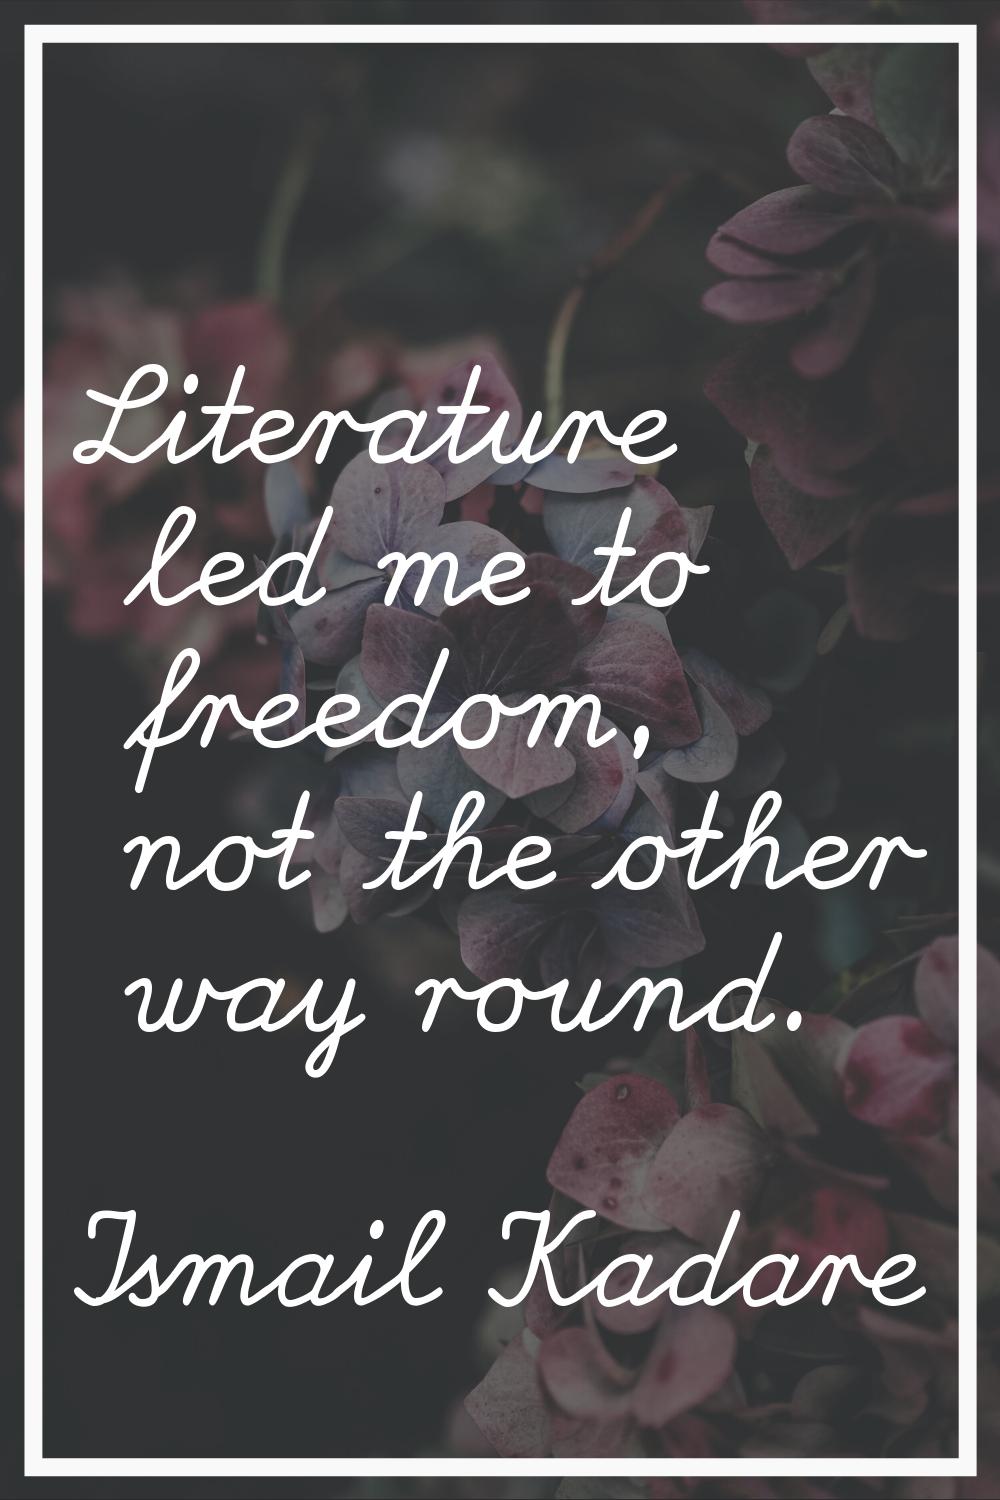 Literature led me to freedom, not the other way round.